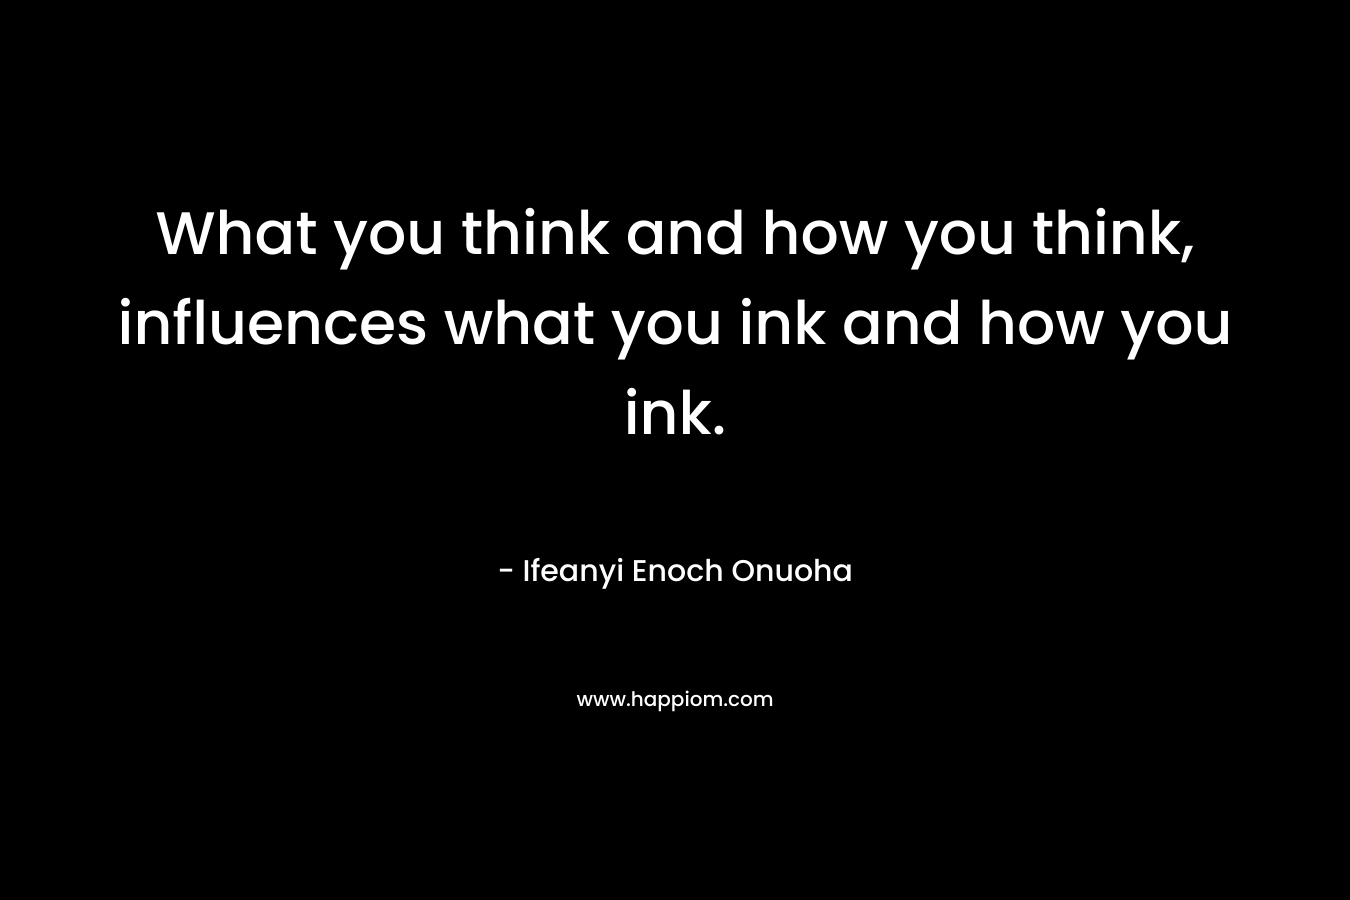 What you think and how you think, influences what you ink and how you ink.